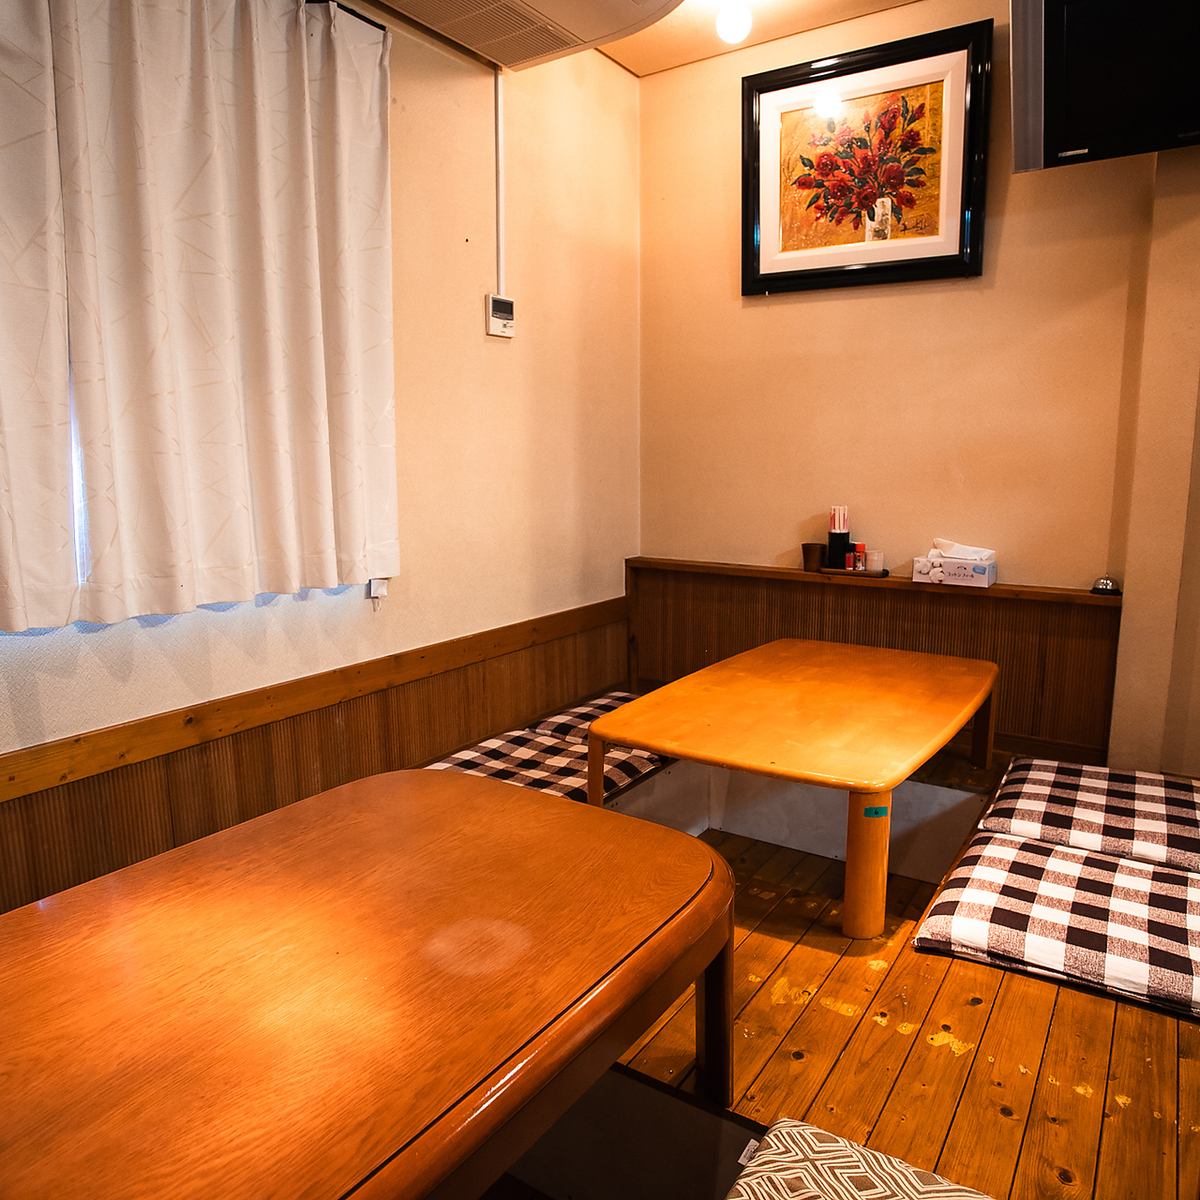 There are plenty of tatami seats where you can relax and enjoy your meal.